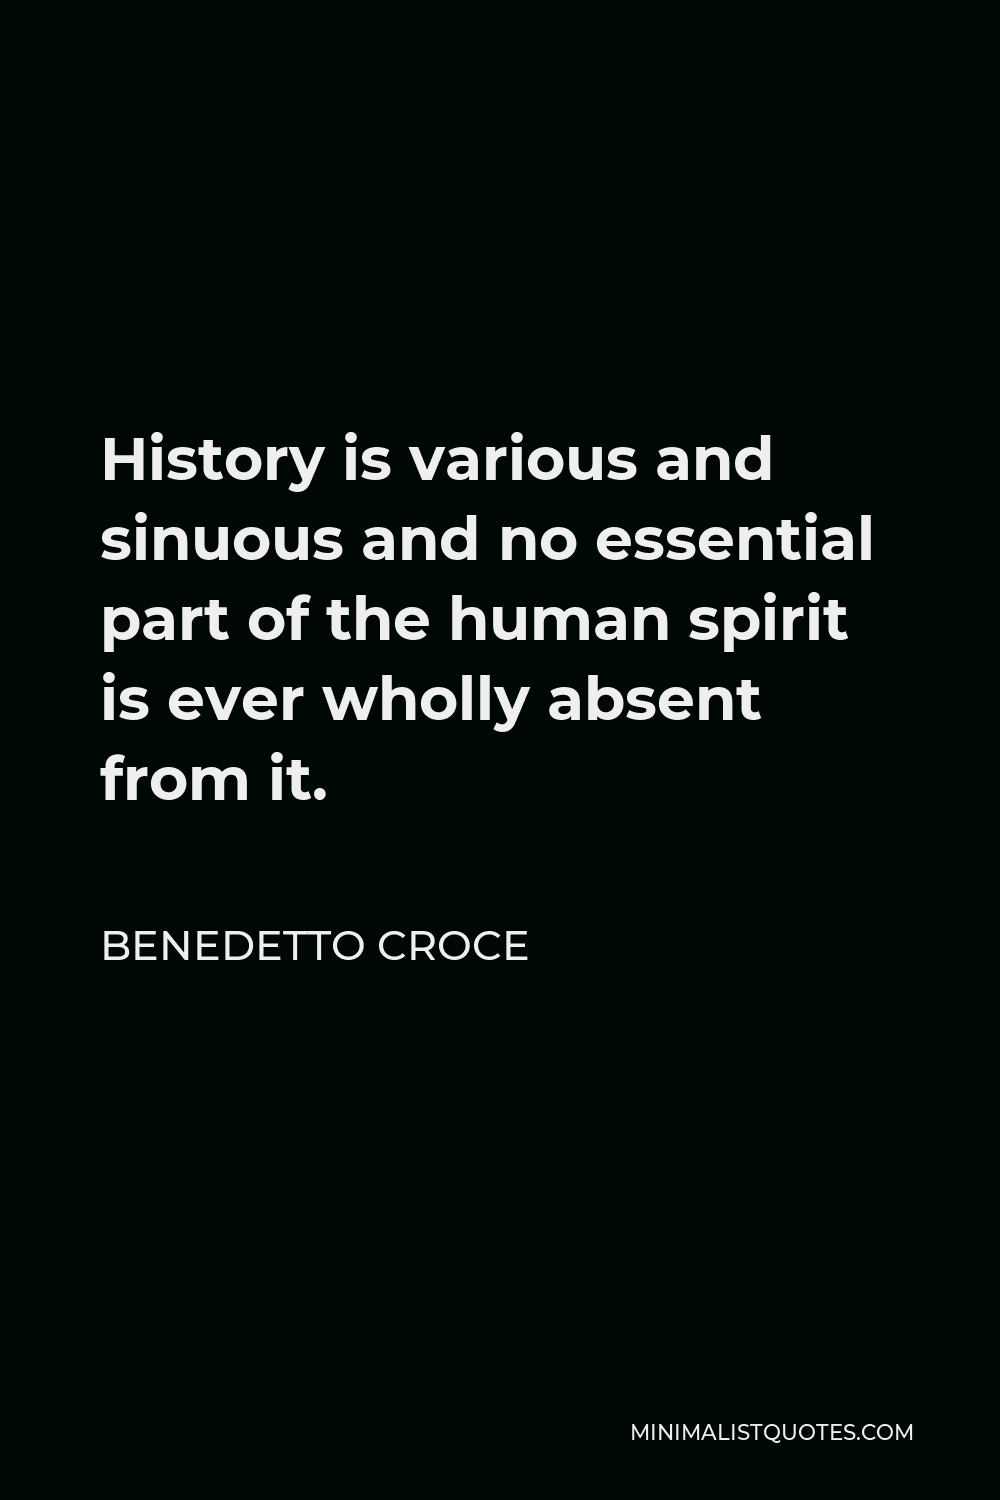 Benedetto Croce Quote - History is various and sinuous and no essential part of the human spirit is ever wholly absent from it.